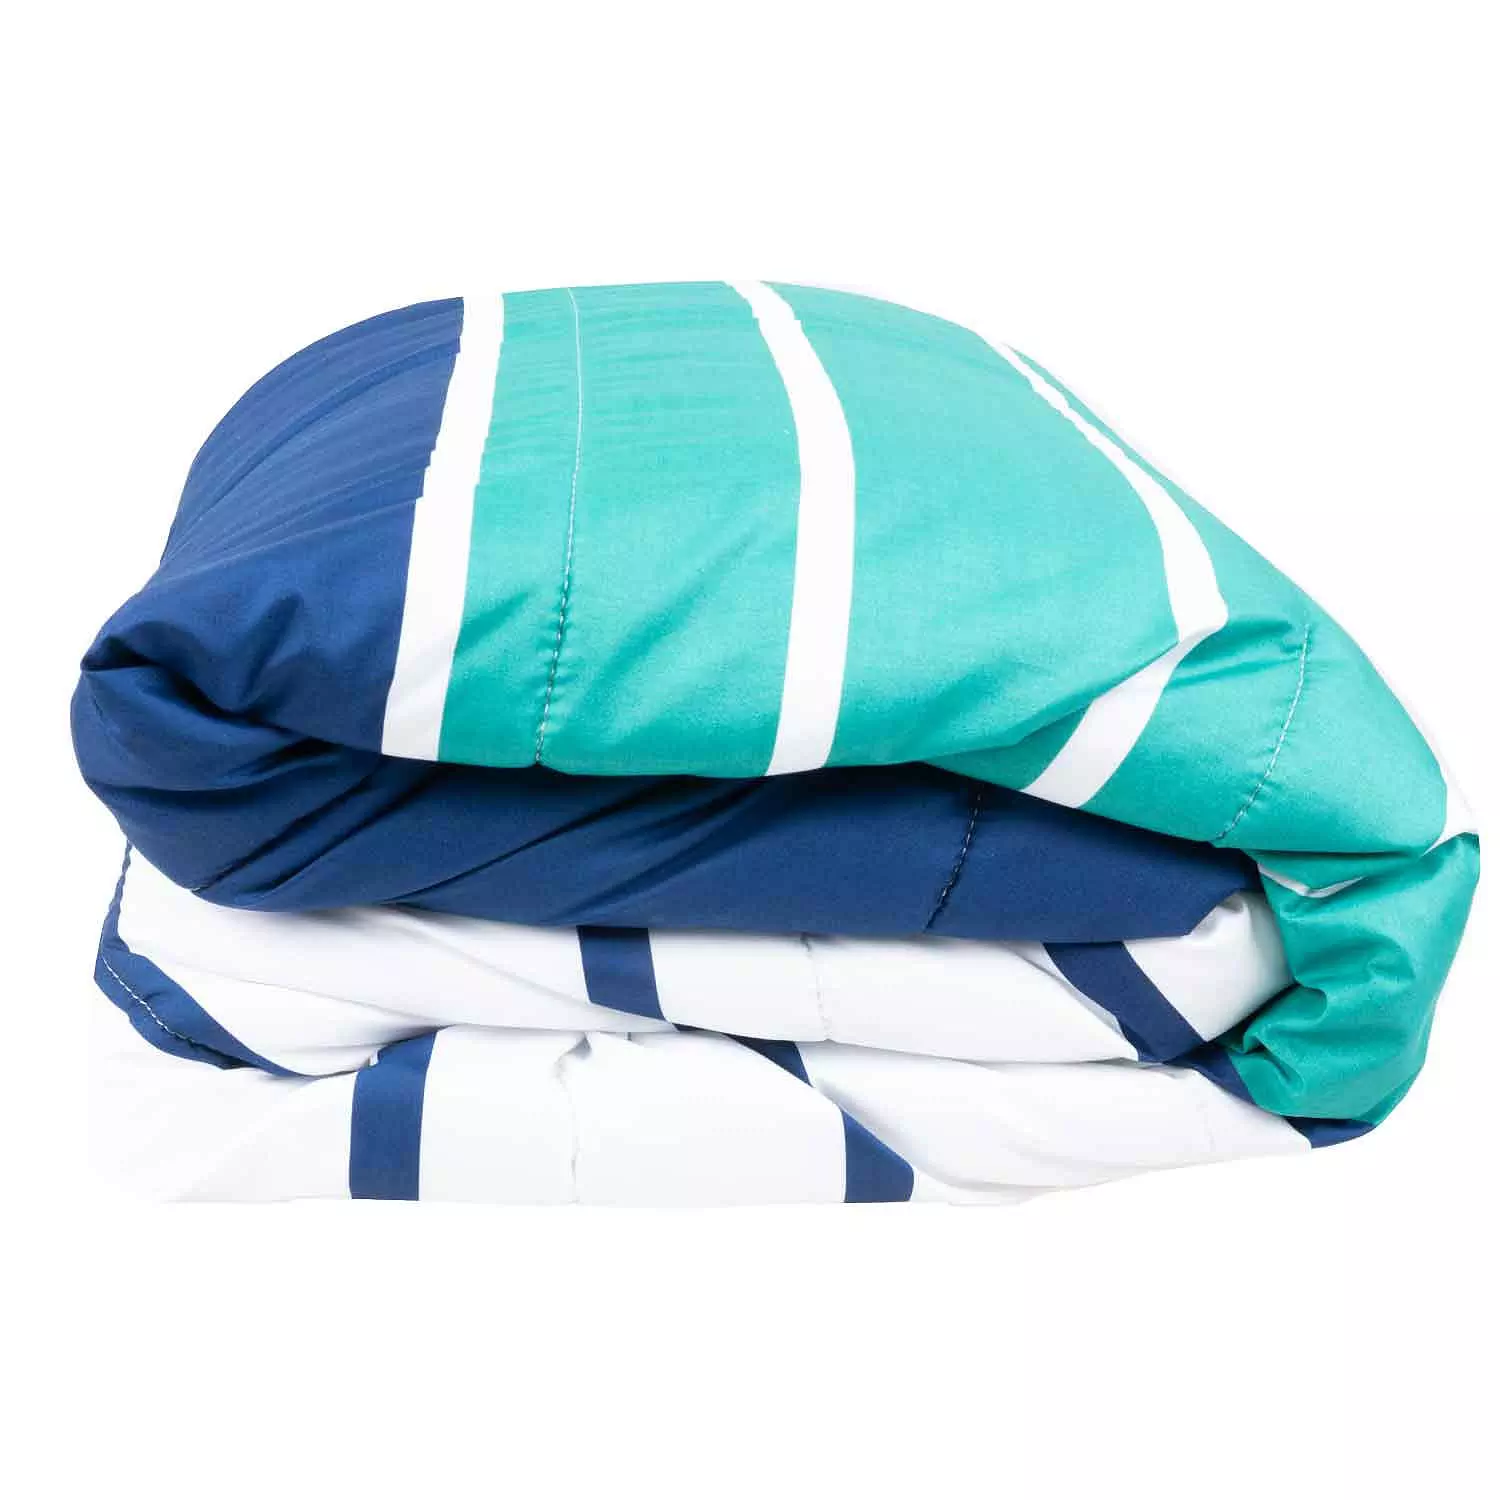 Blue, teal and white stripe print comforter, king